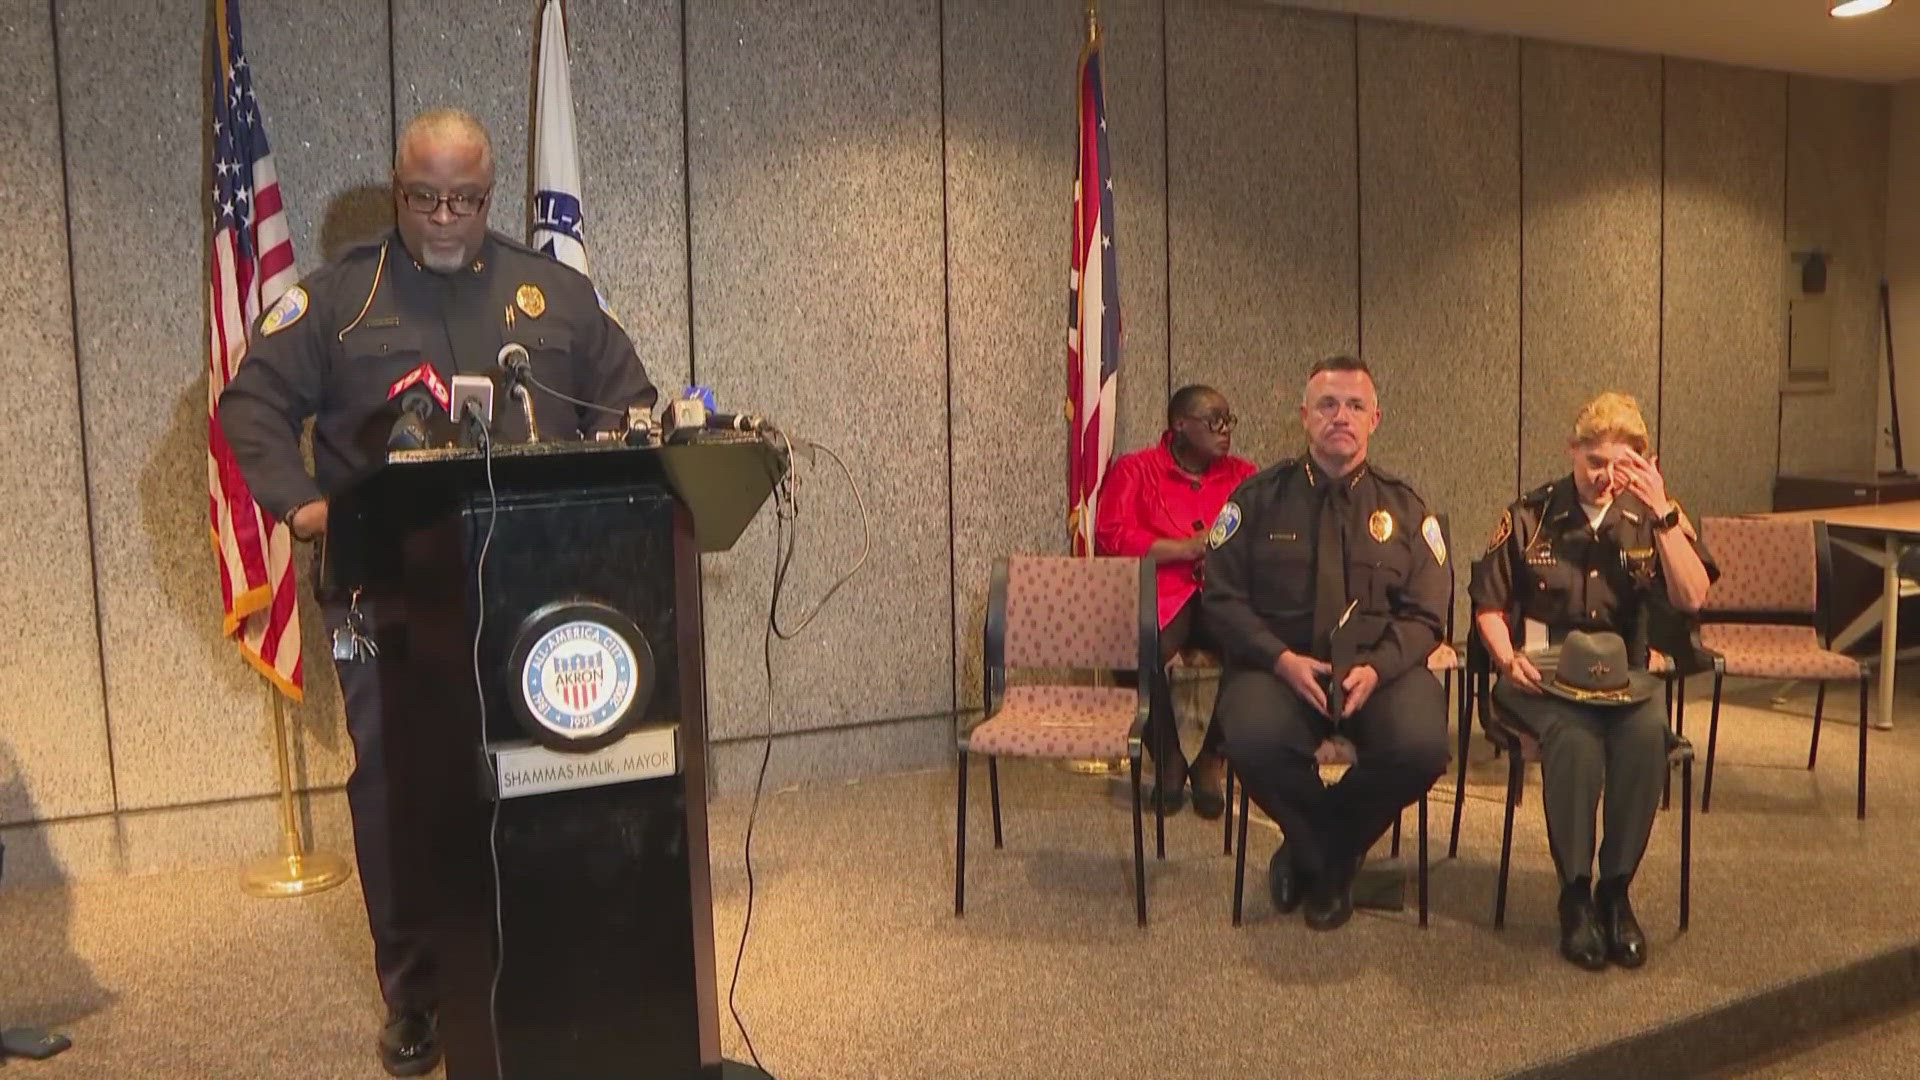 3News live streamed the press conference on Sunday evening.